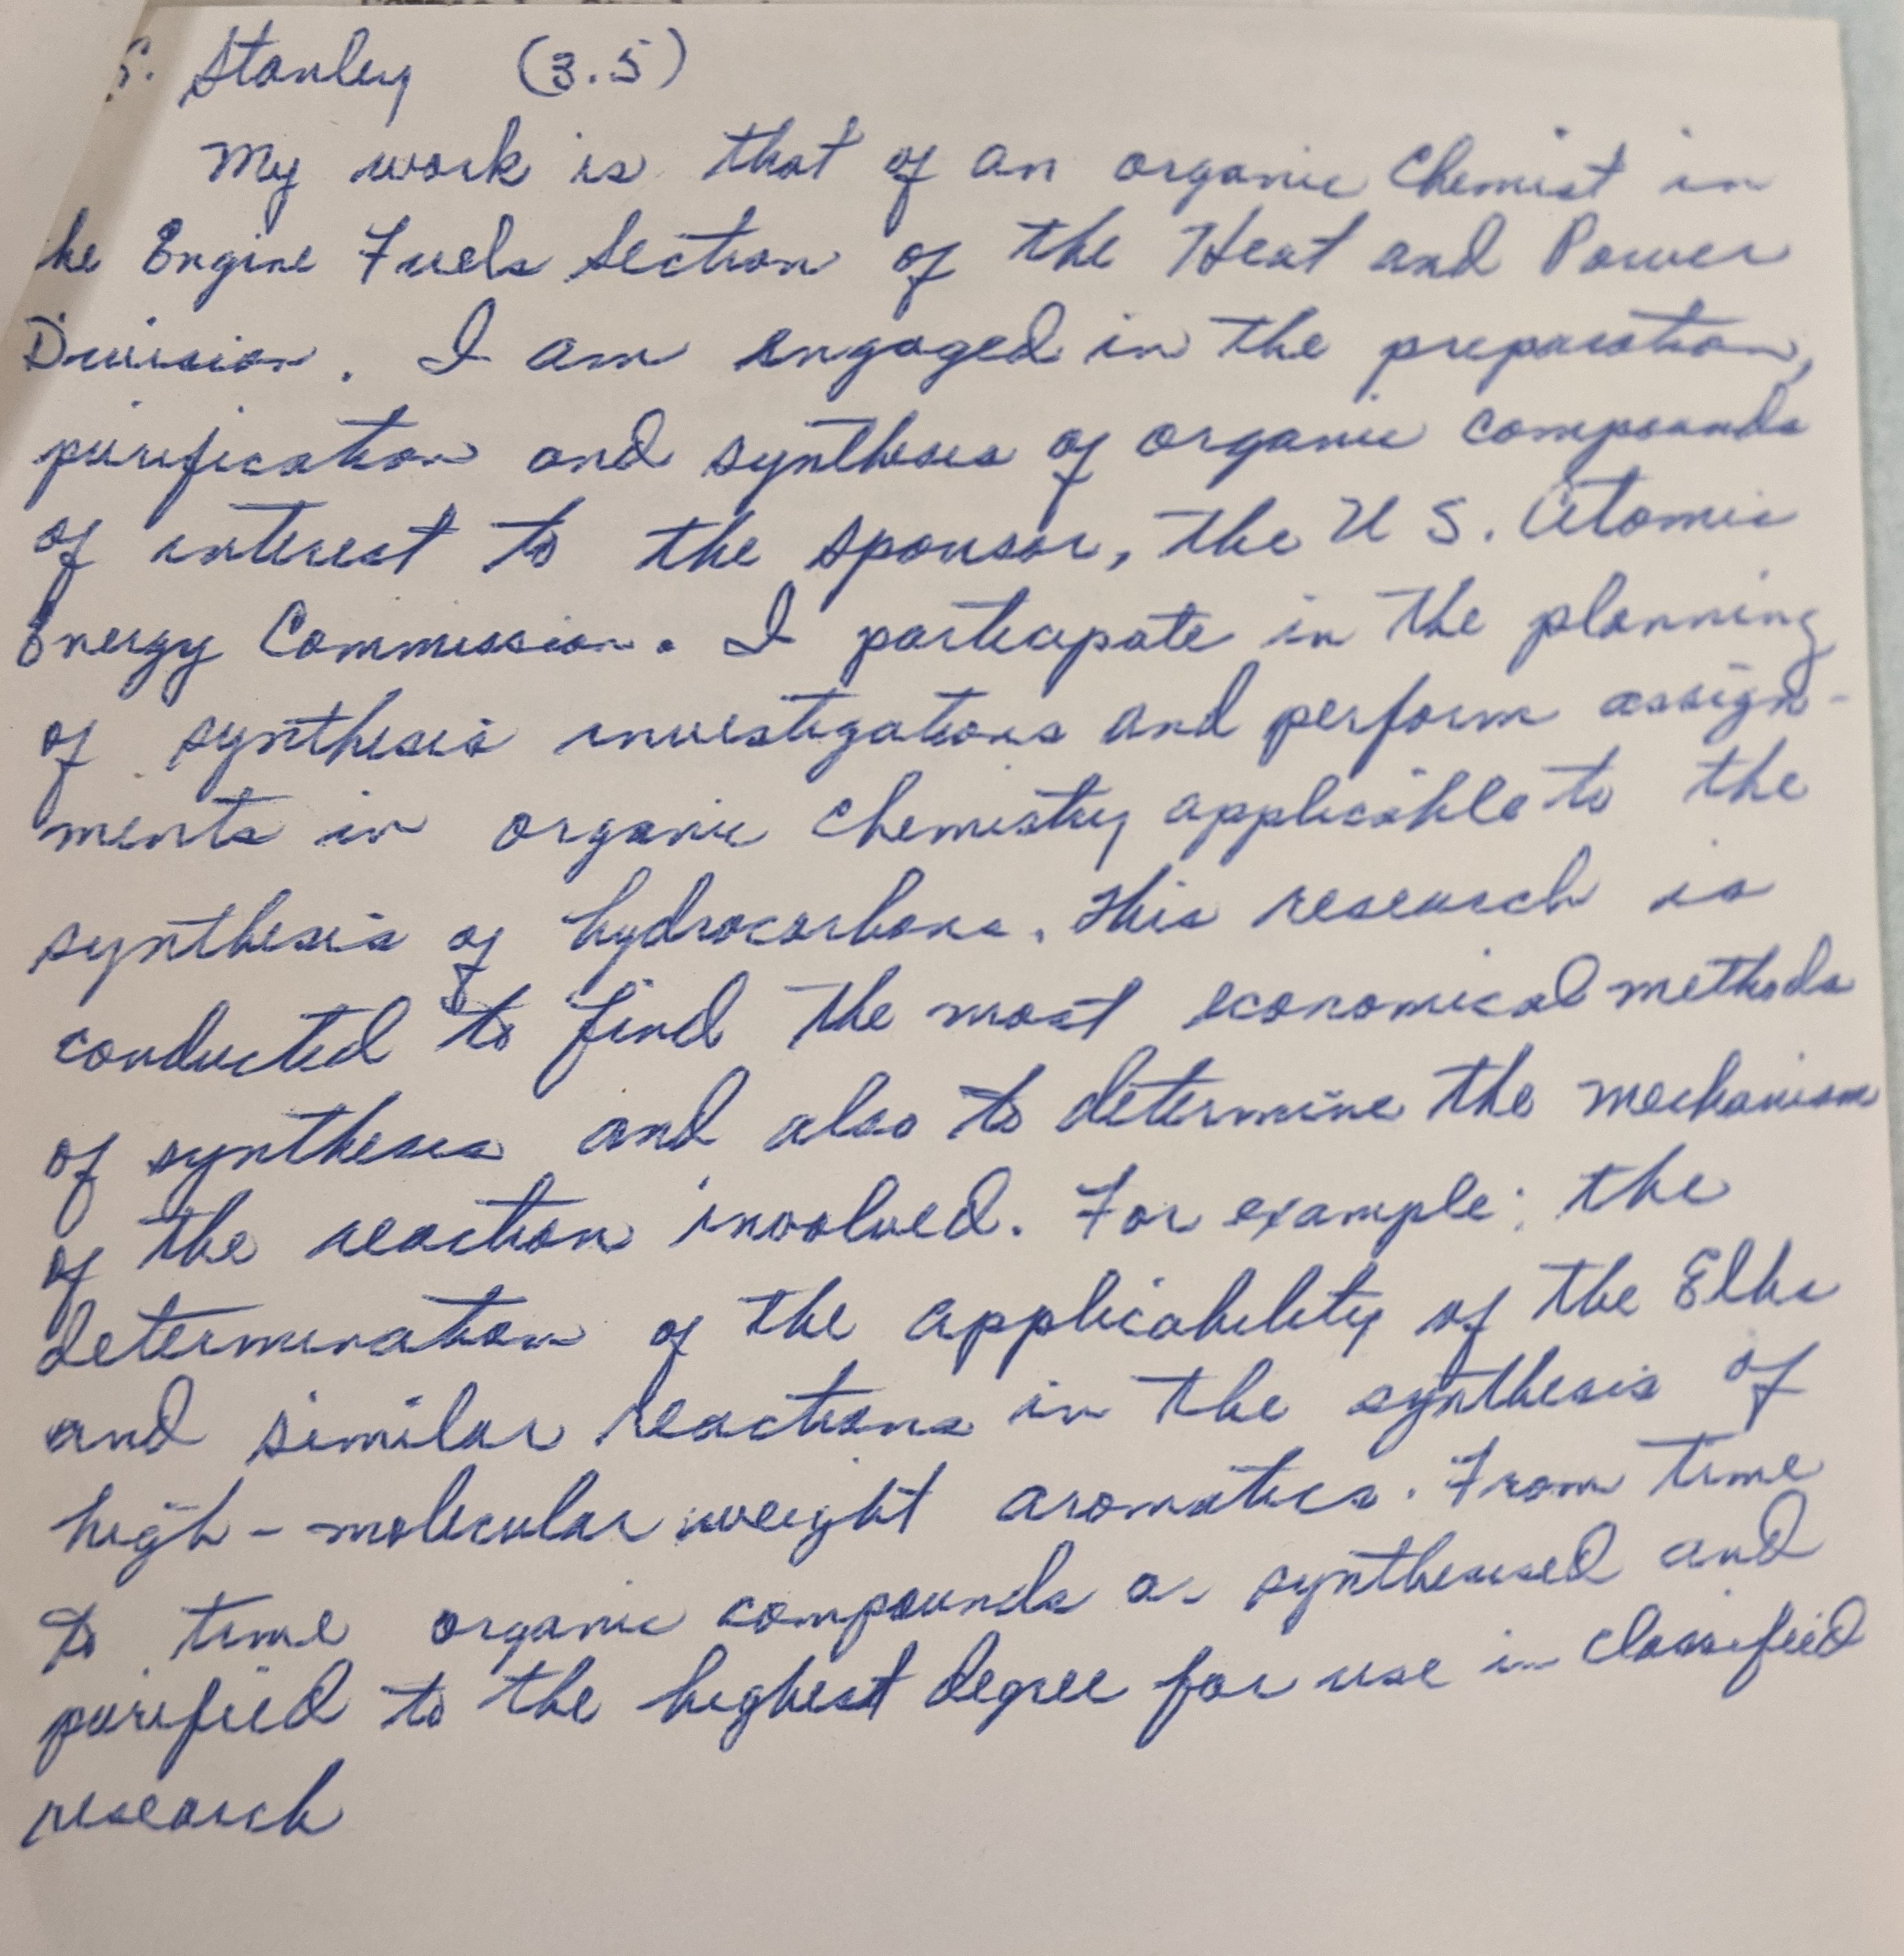 Photo shows letter written in cursive with blue ink.